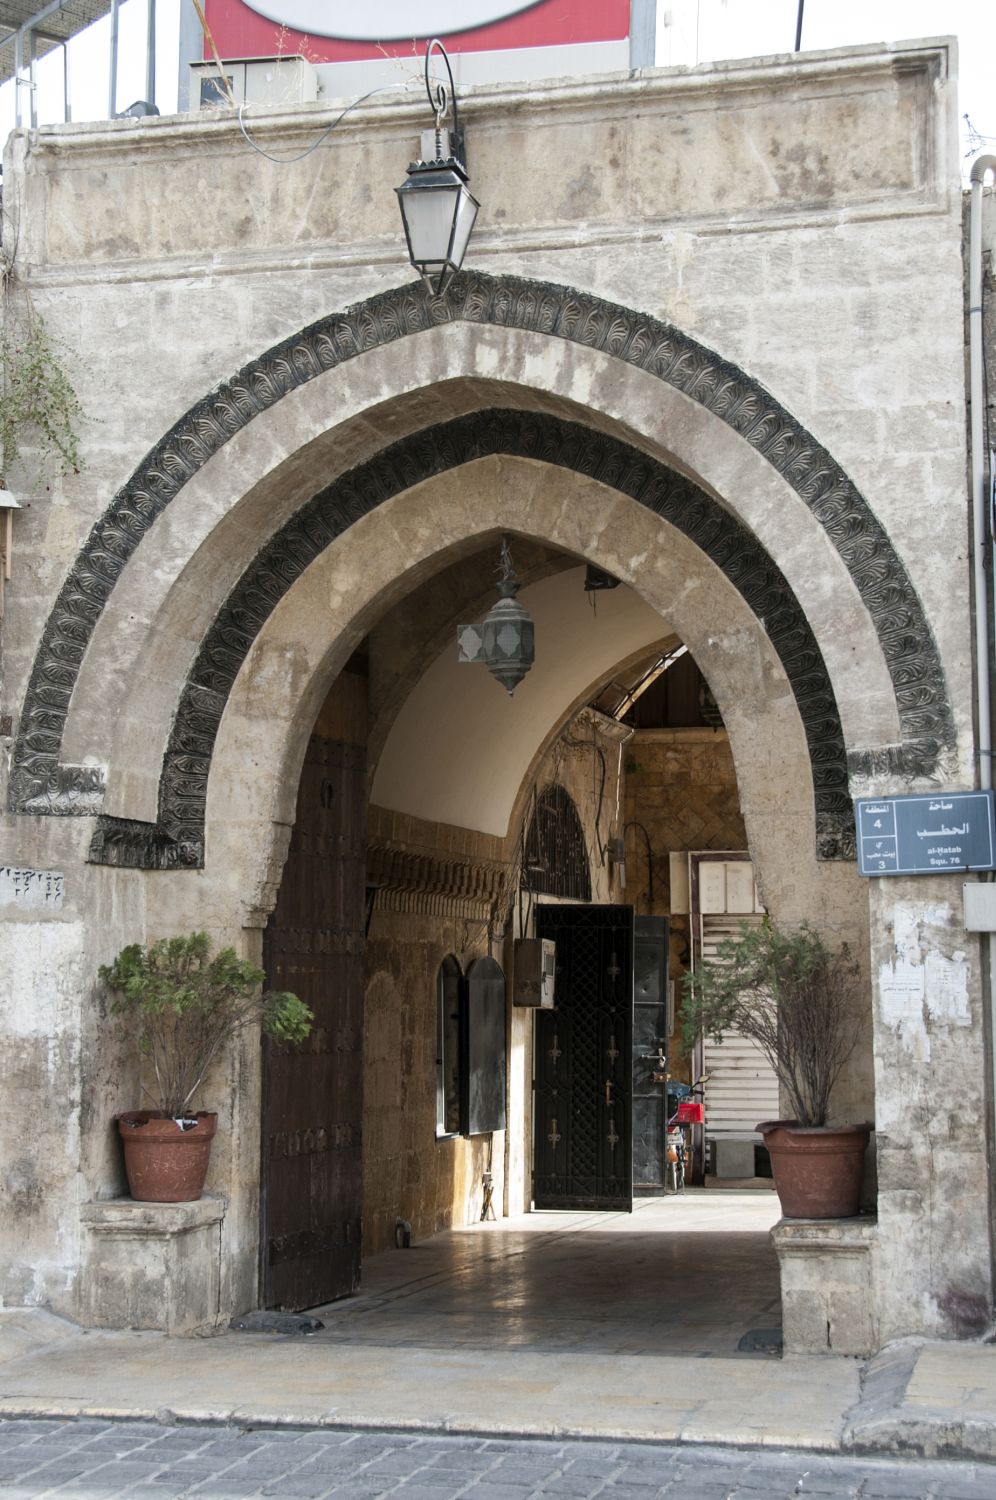 Arched entryway off square.